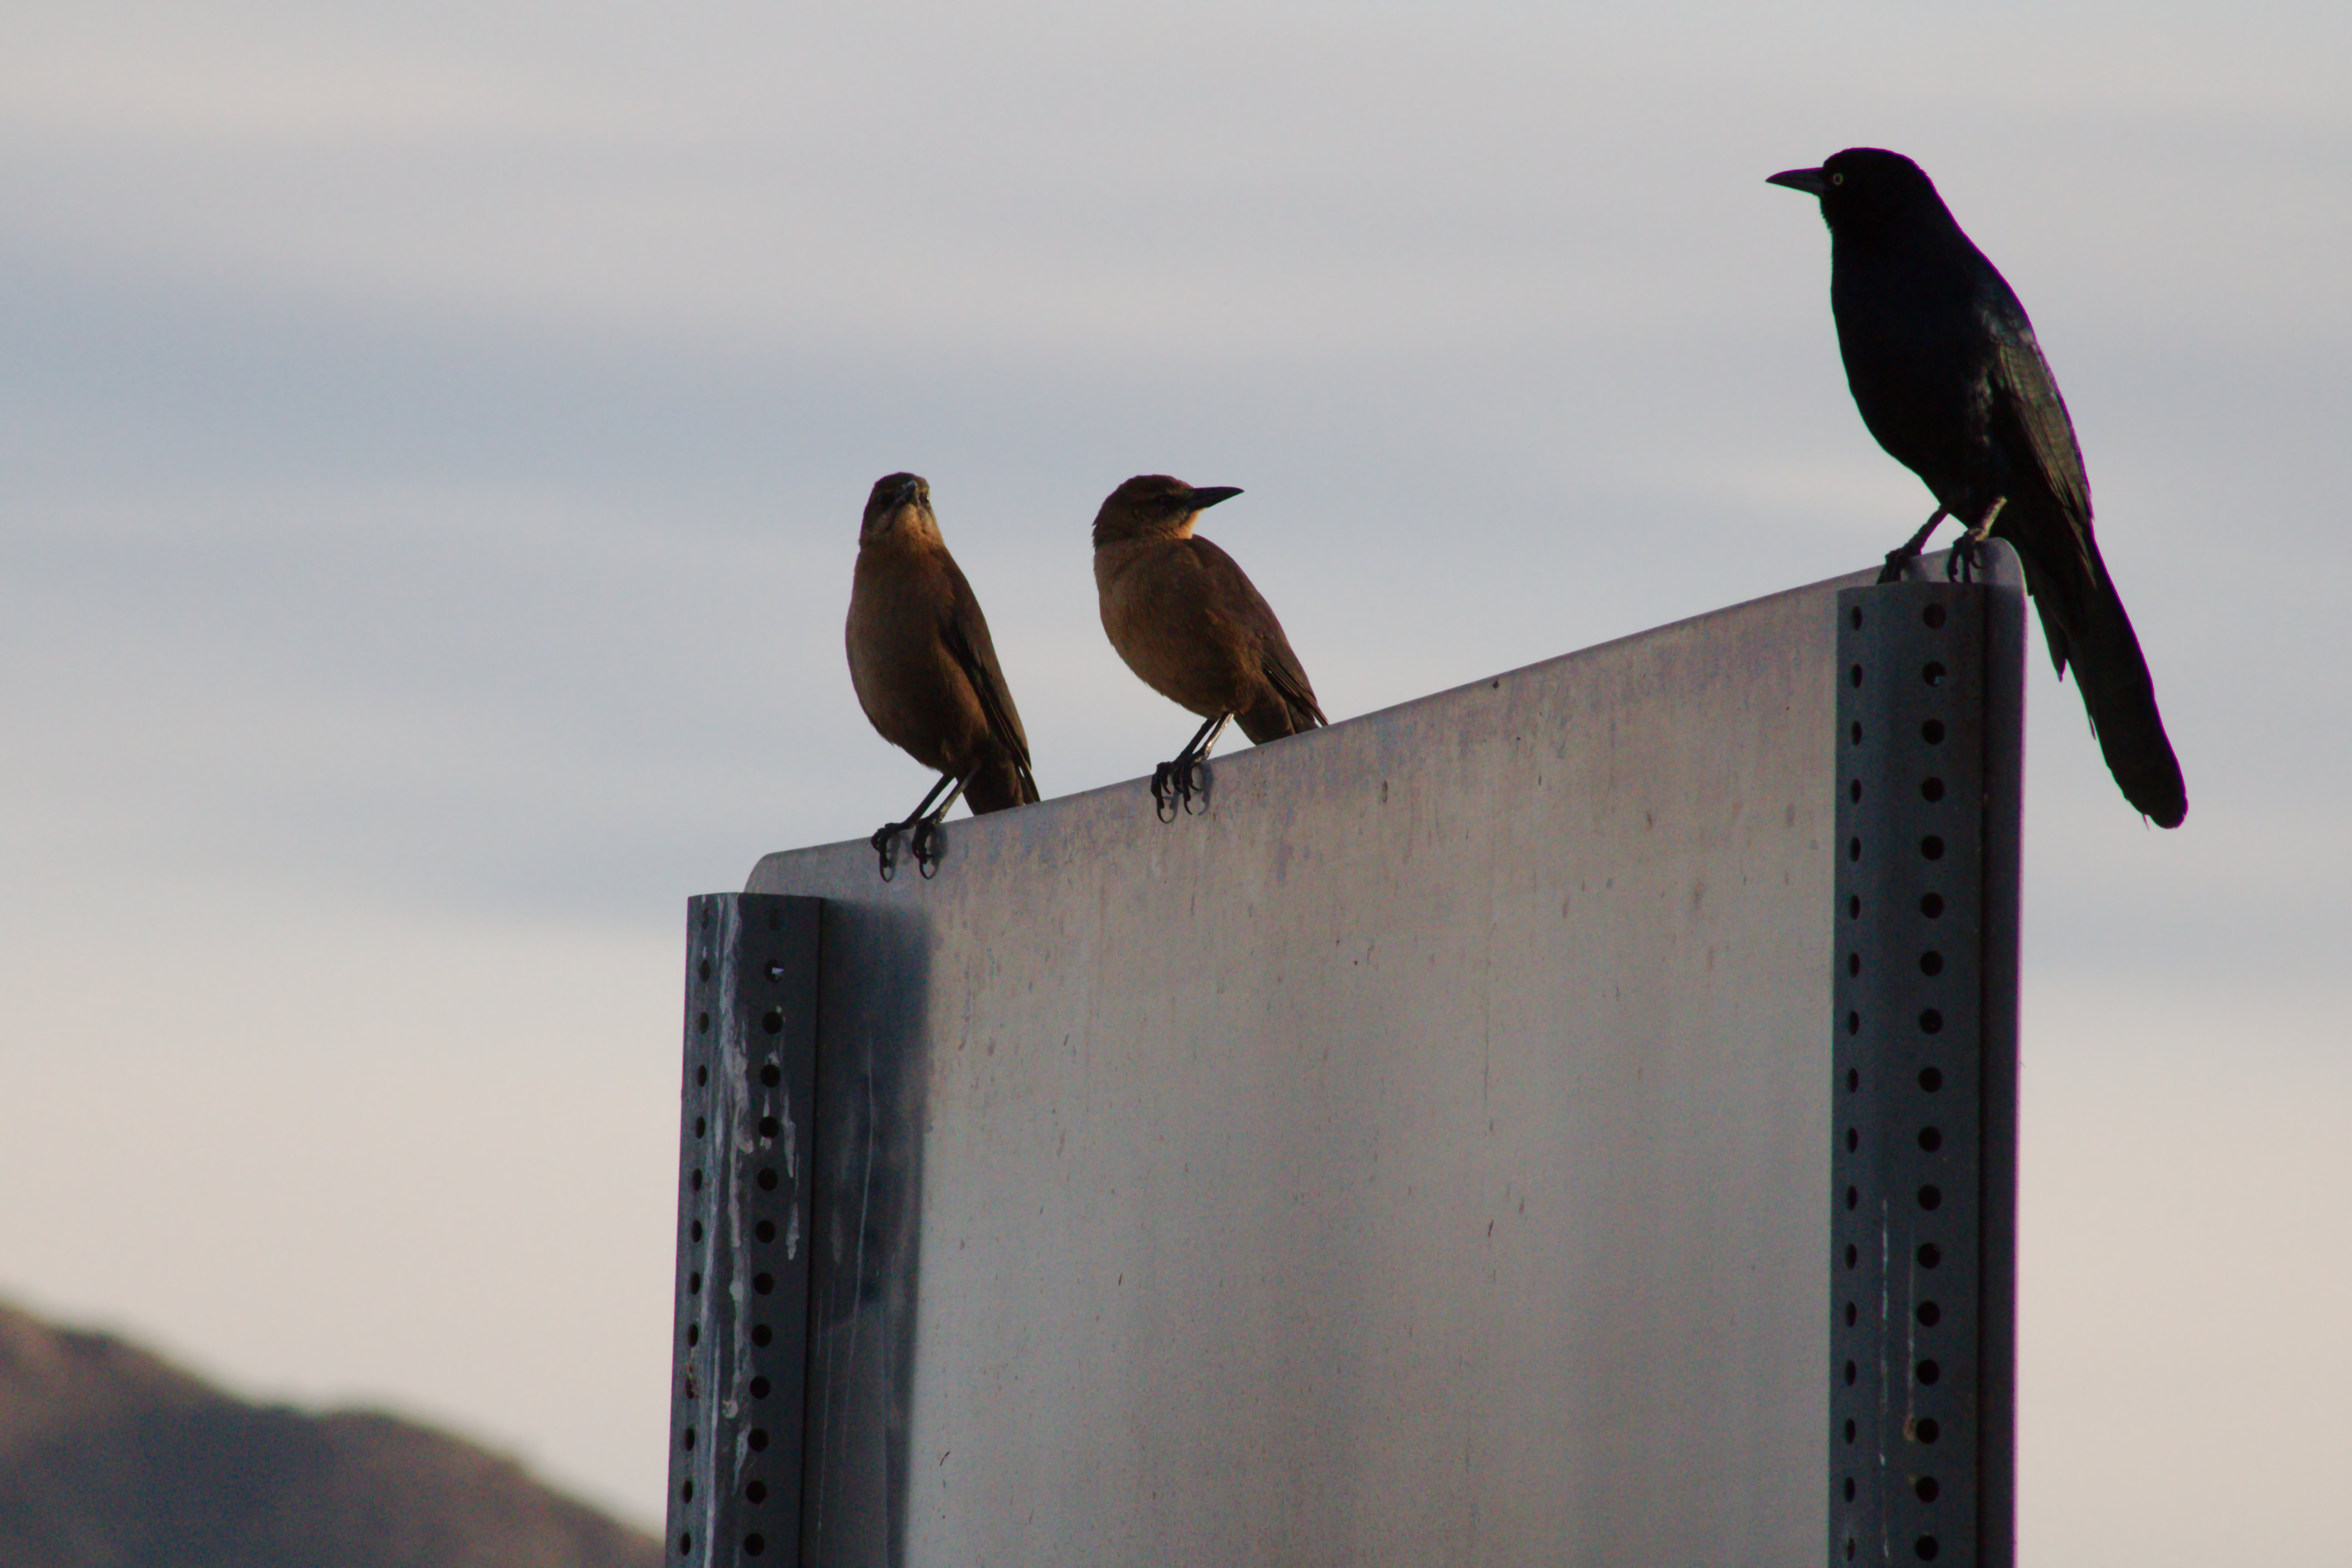 A Great-tailed Grackle and (maybe?) a couple Starlings